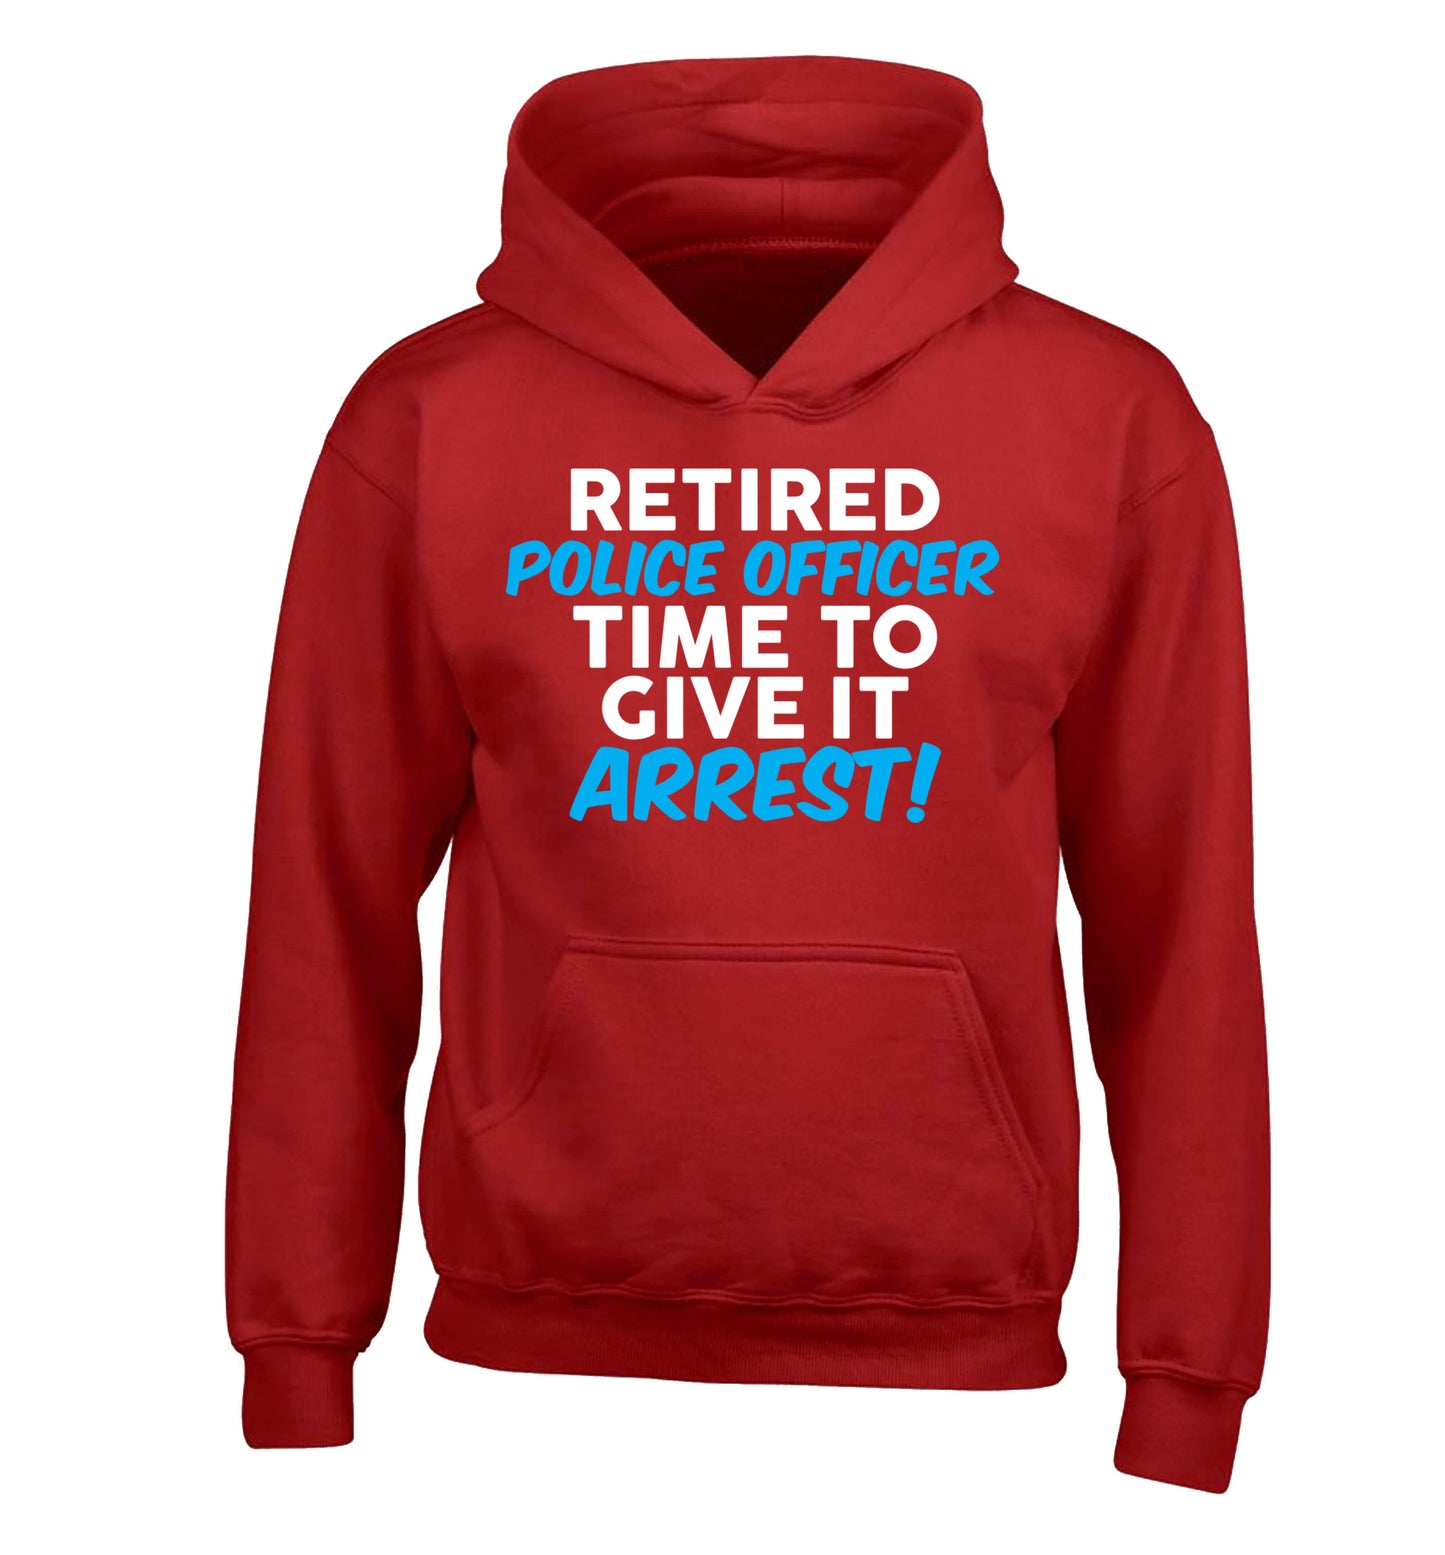 Retired police officer time to give it arrest children's red hoodie 12-13 Years